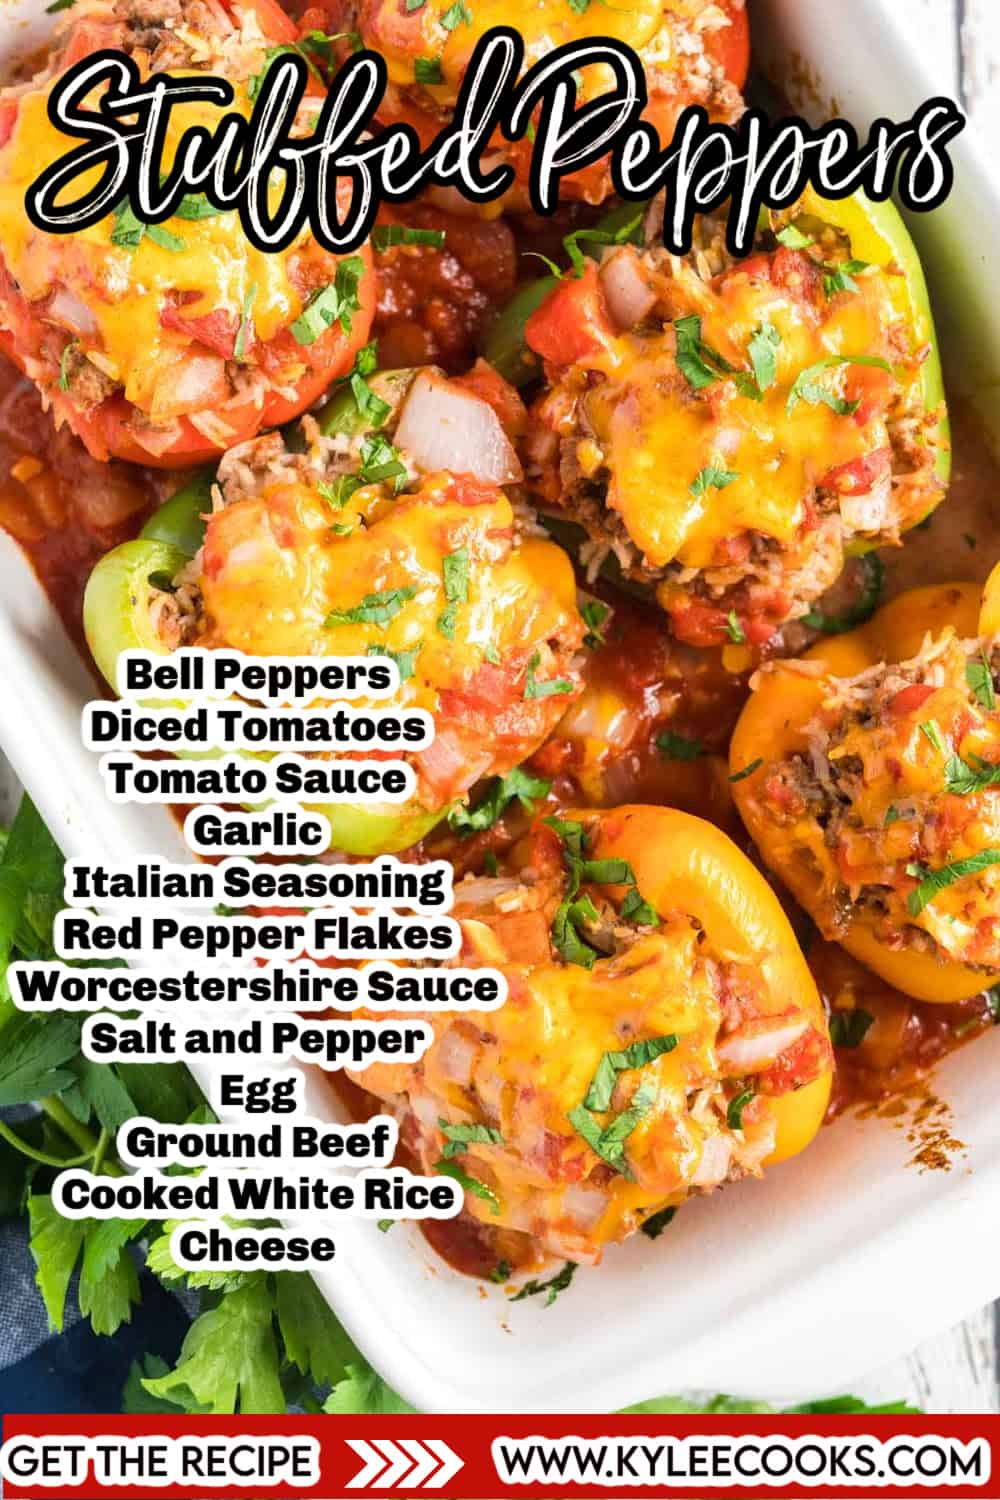 stuffed peppers with recipe name overlaid in text